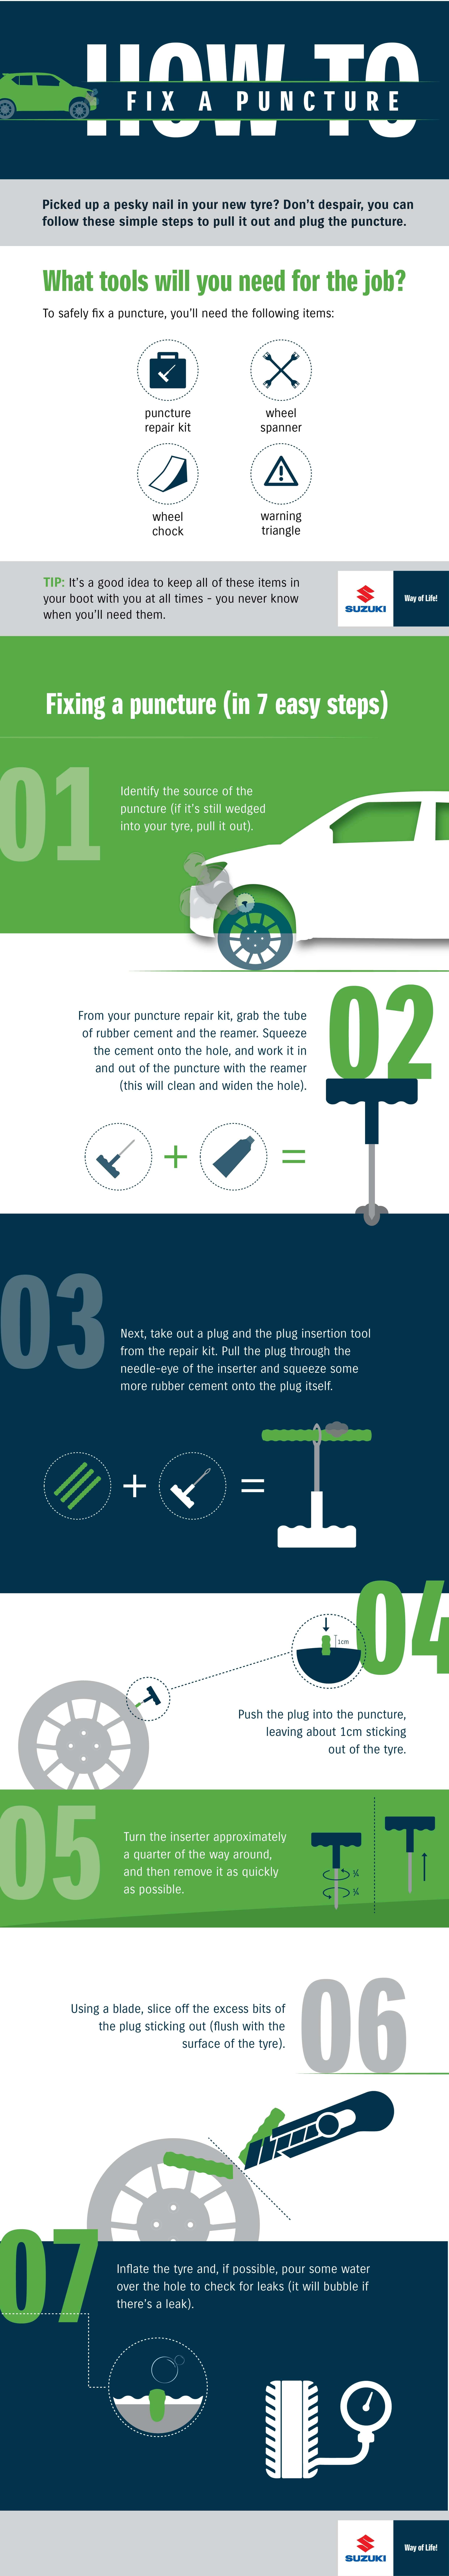 How to fix a puncture infographic